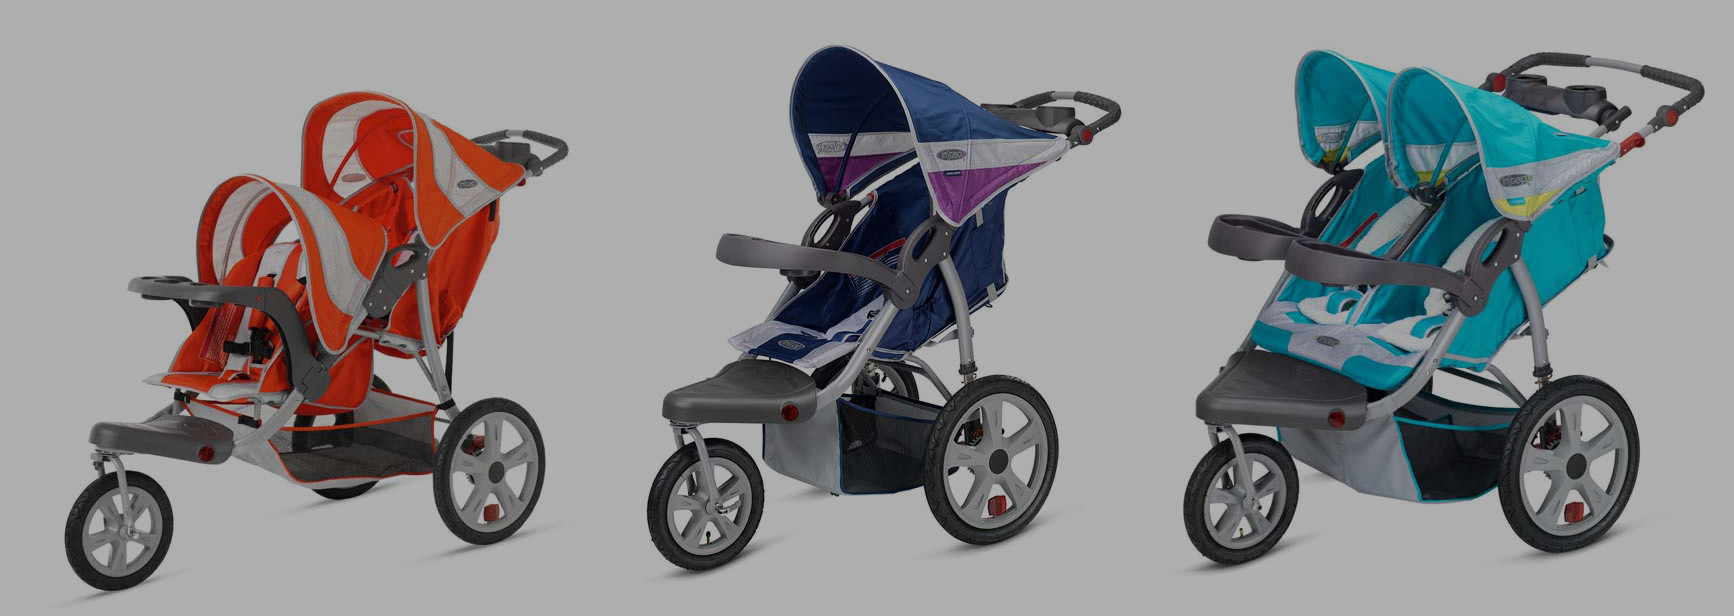 After 215 Reported Injuries, Pacific Cycle Recalls 217K Strollers